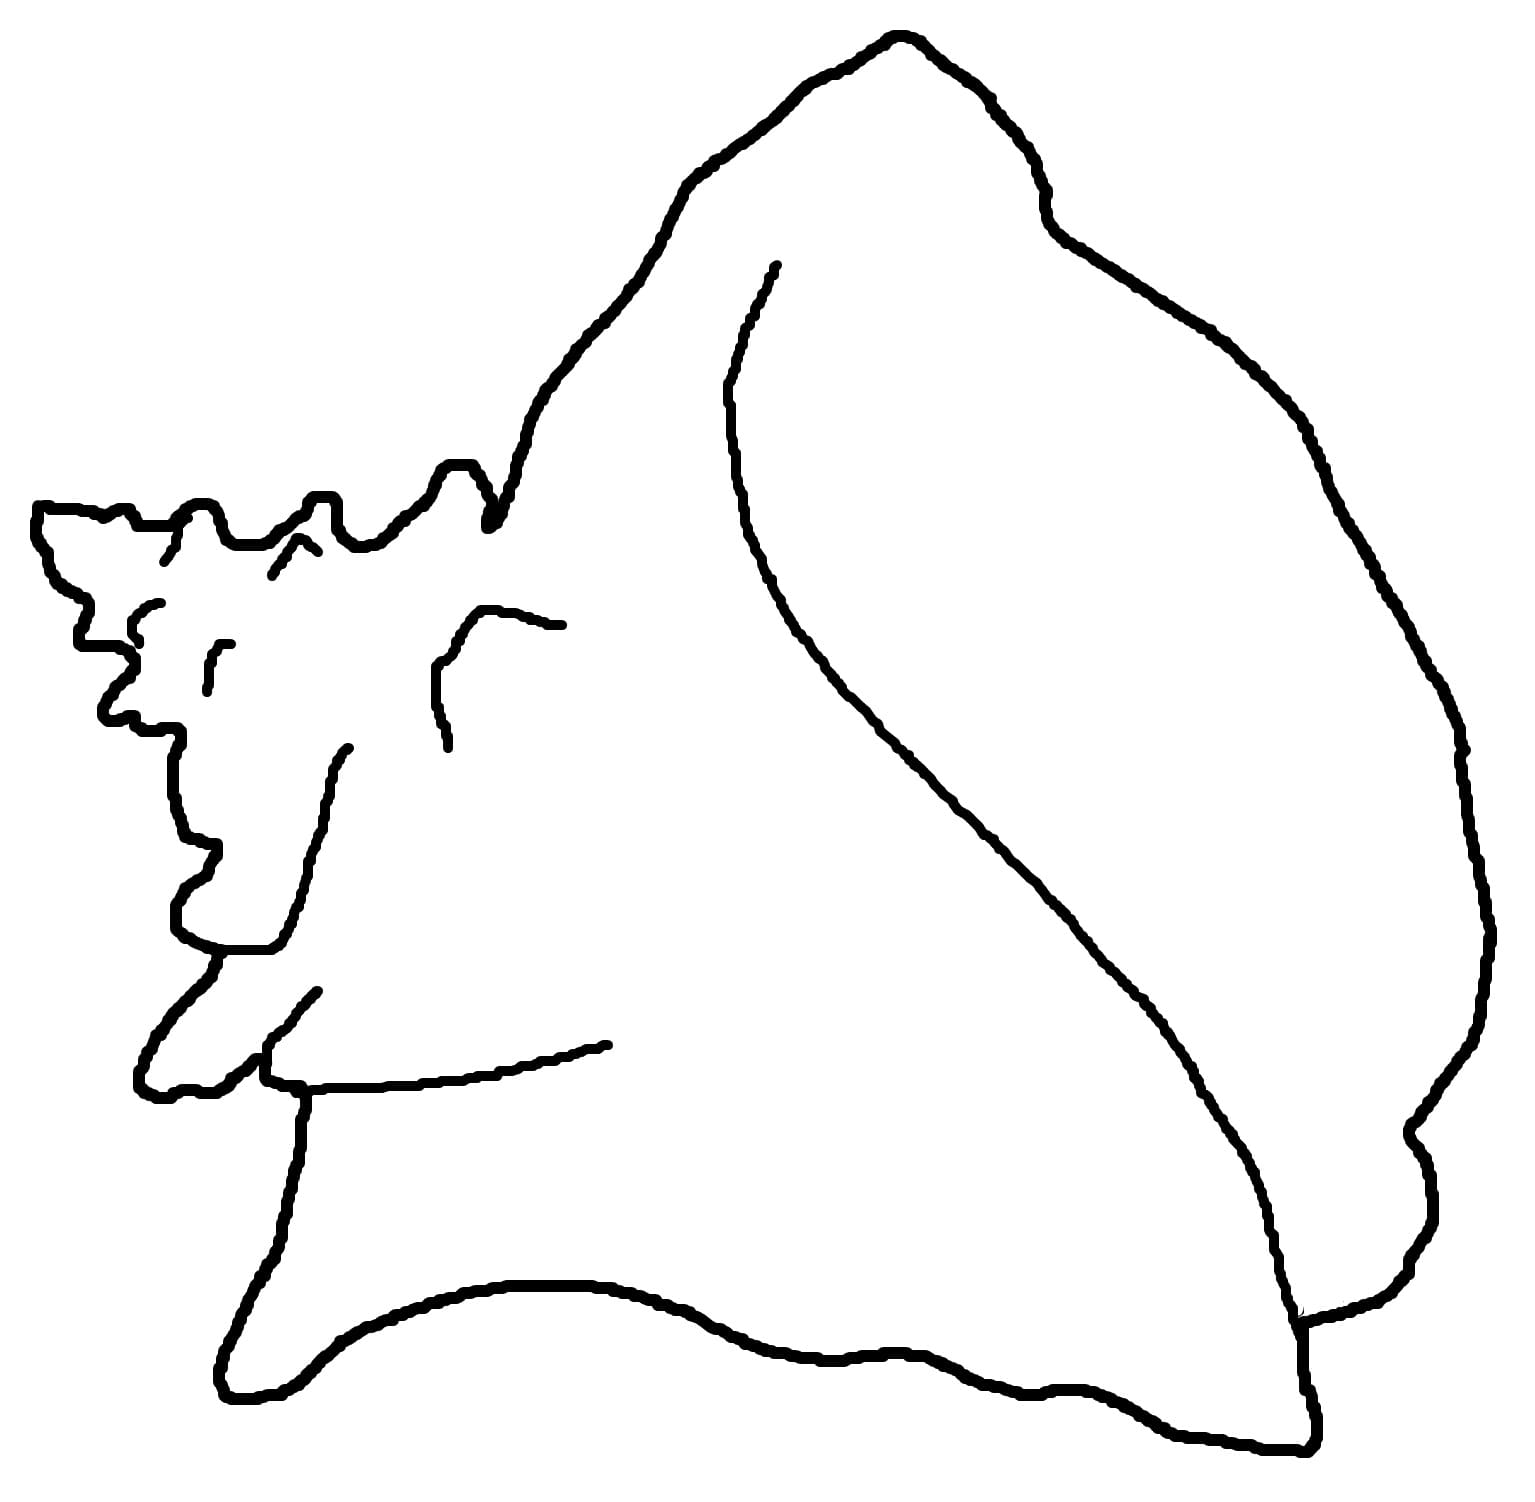 Conch Shell Image Coloring Page